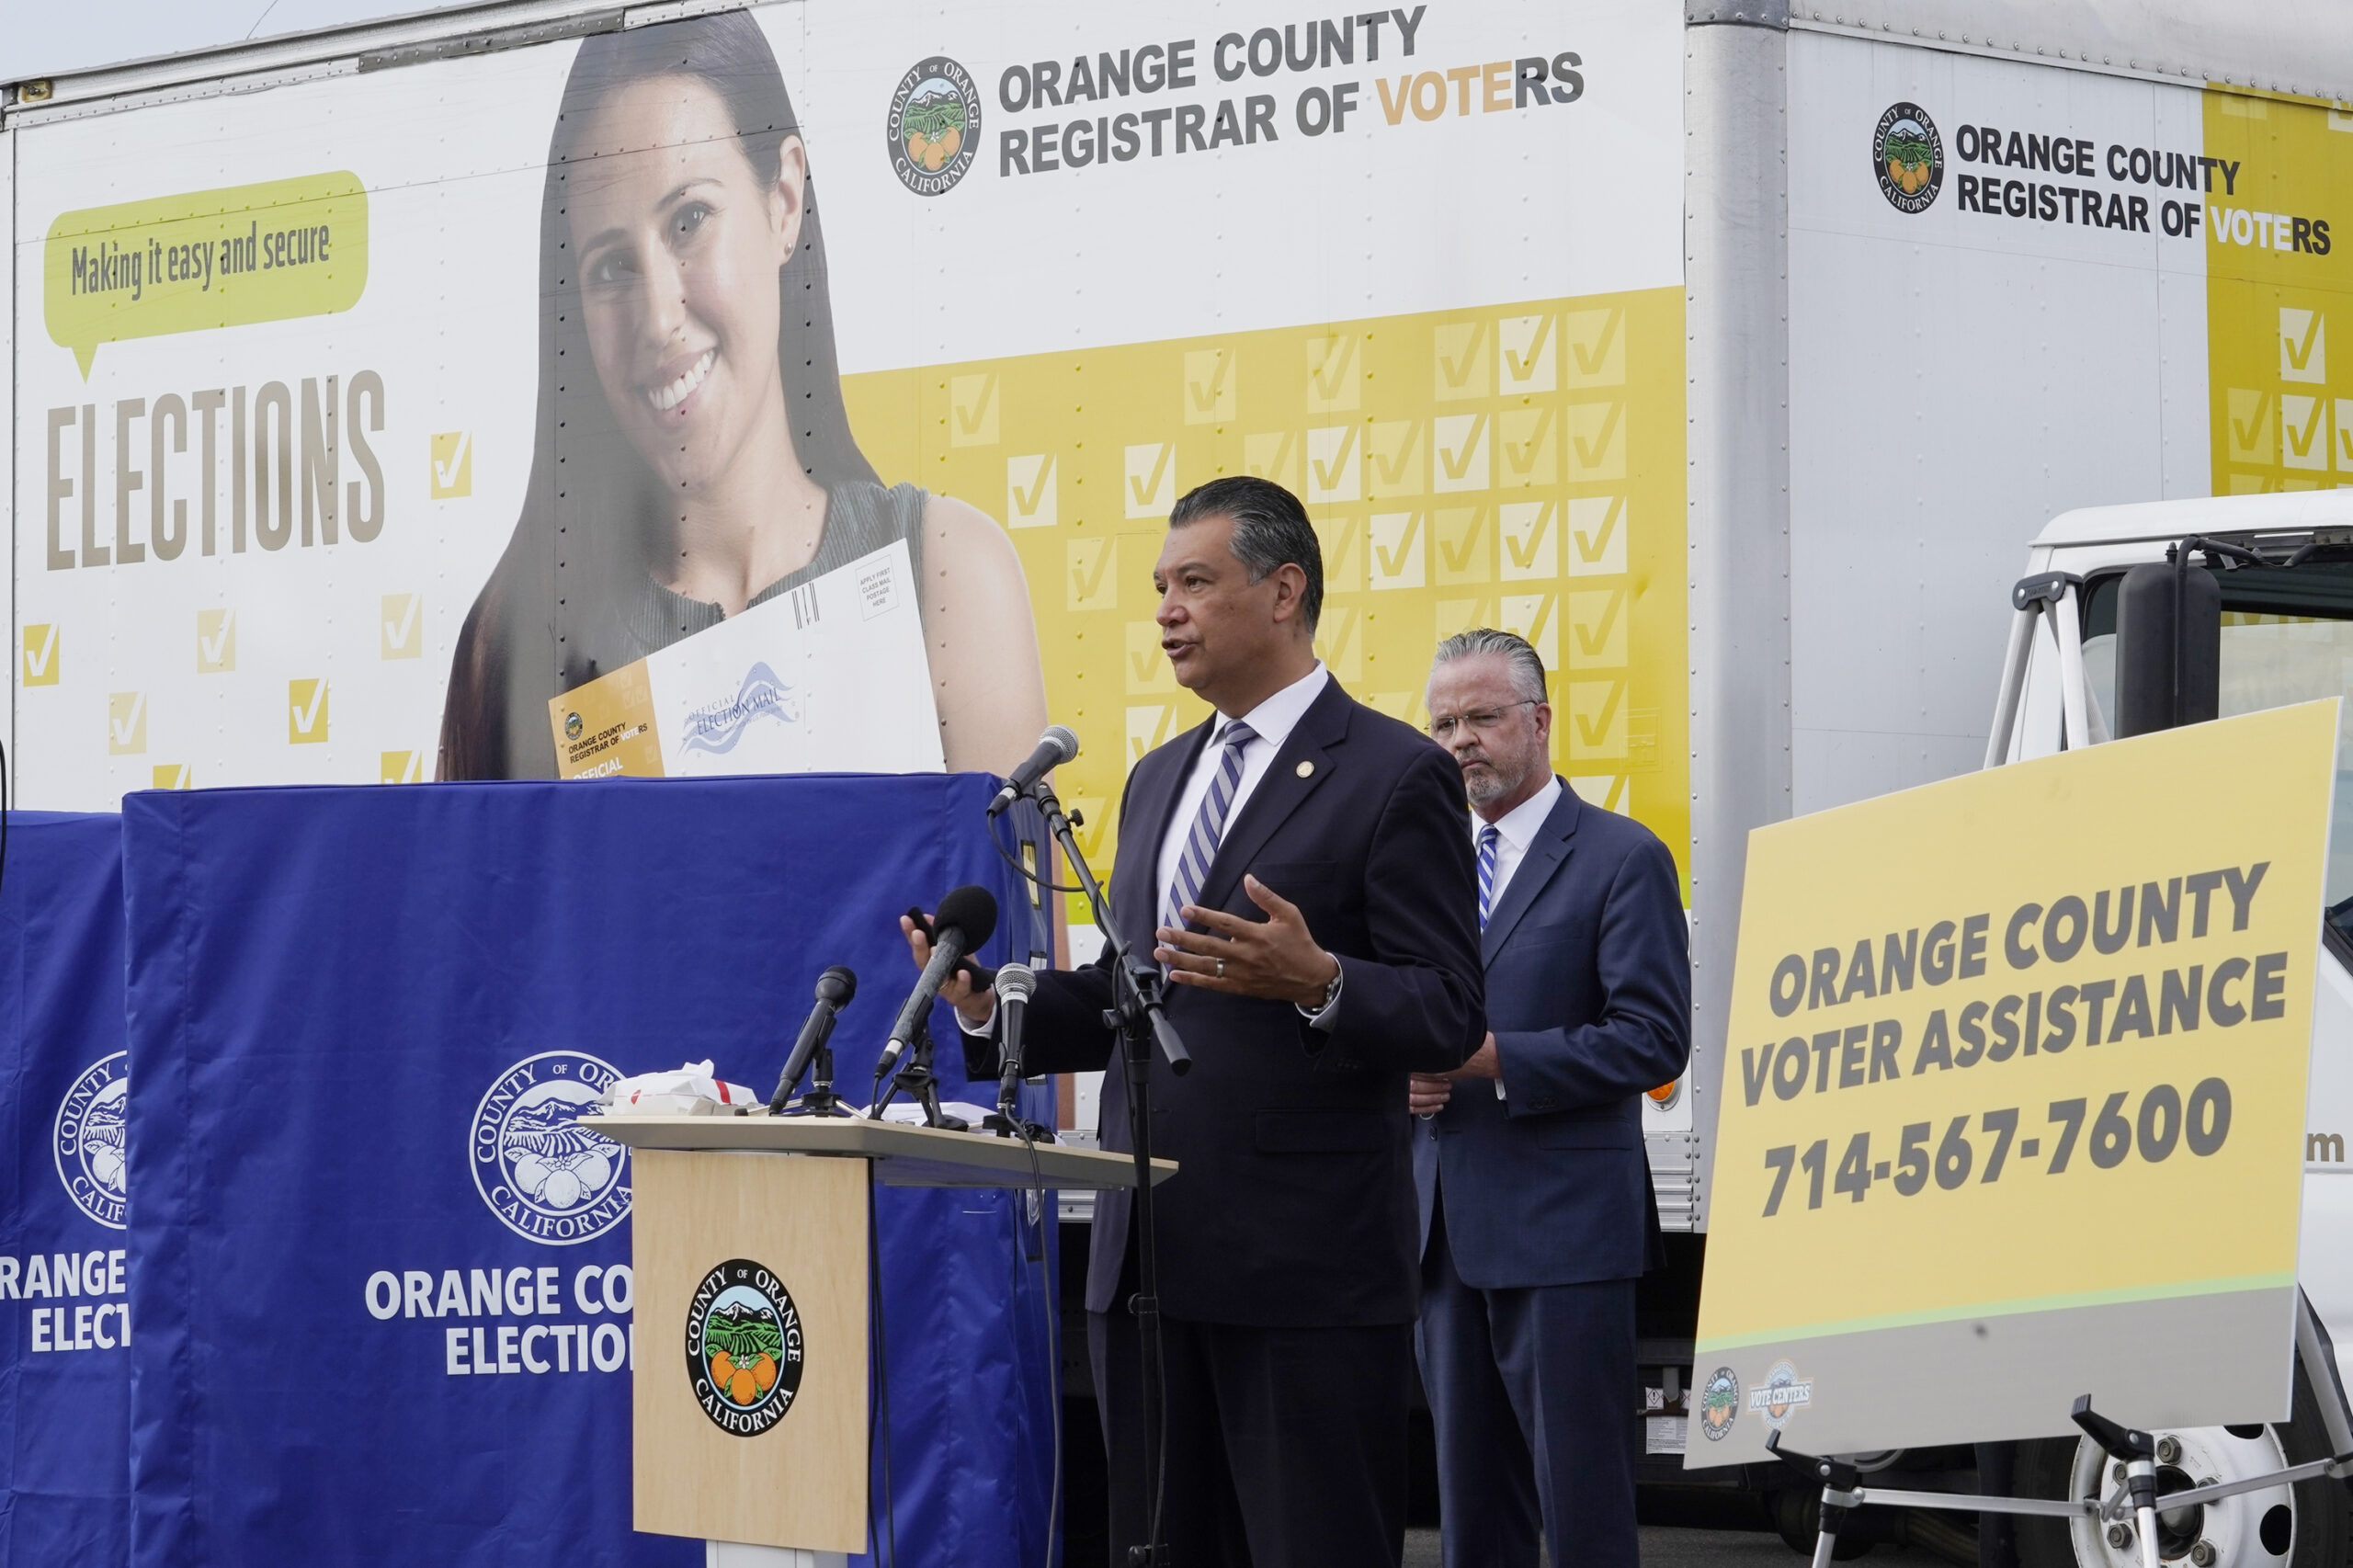 FILE - In this Oct. 5, 2020, file photo, California Secretary of State Alex Padilla, left, and Orange County Registrar of Voters Neal Kelley hold a news conference on Orange County's comprehensive plans to safeguard the election and provide transparency in Santa Ana, Calif. California election officials have received reports that unofficial ballot drop boxes were placed in several counties and said these set-ups are illegal. The Orange County Register reports Monday, Oct. 12, 2020, that Secretary of State spokesman Sam Mahood said boxes were reported in Fresno, Los Angeles and Orange counties at locations including political party offices, candidate headquarters and churches. He said the state was looking into the origin of the boxes. (AP Photo/Damian Dovarganes, File)